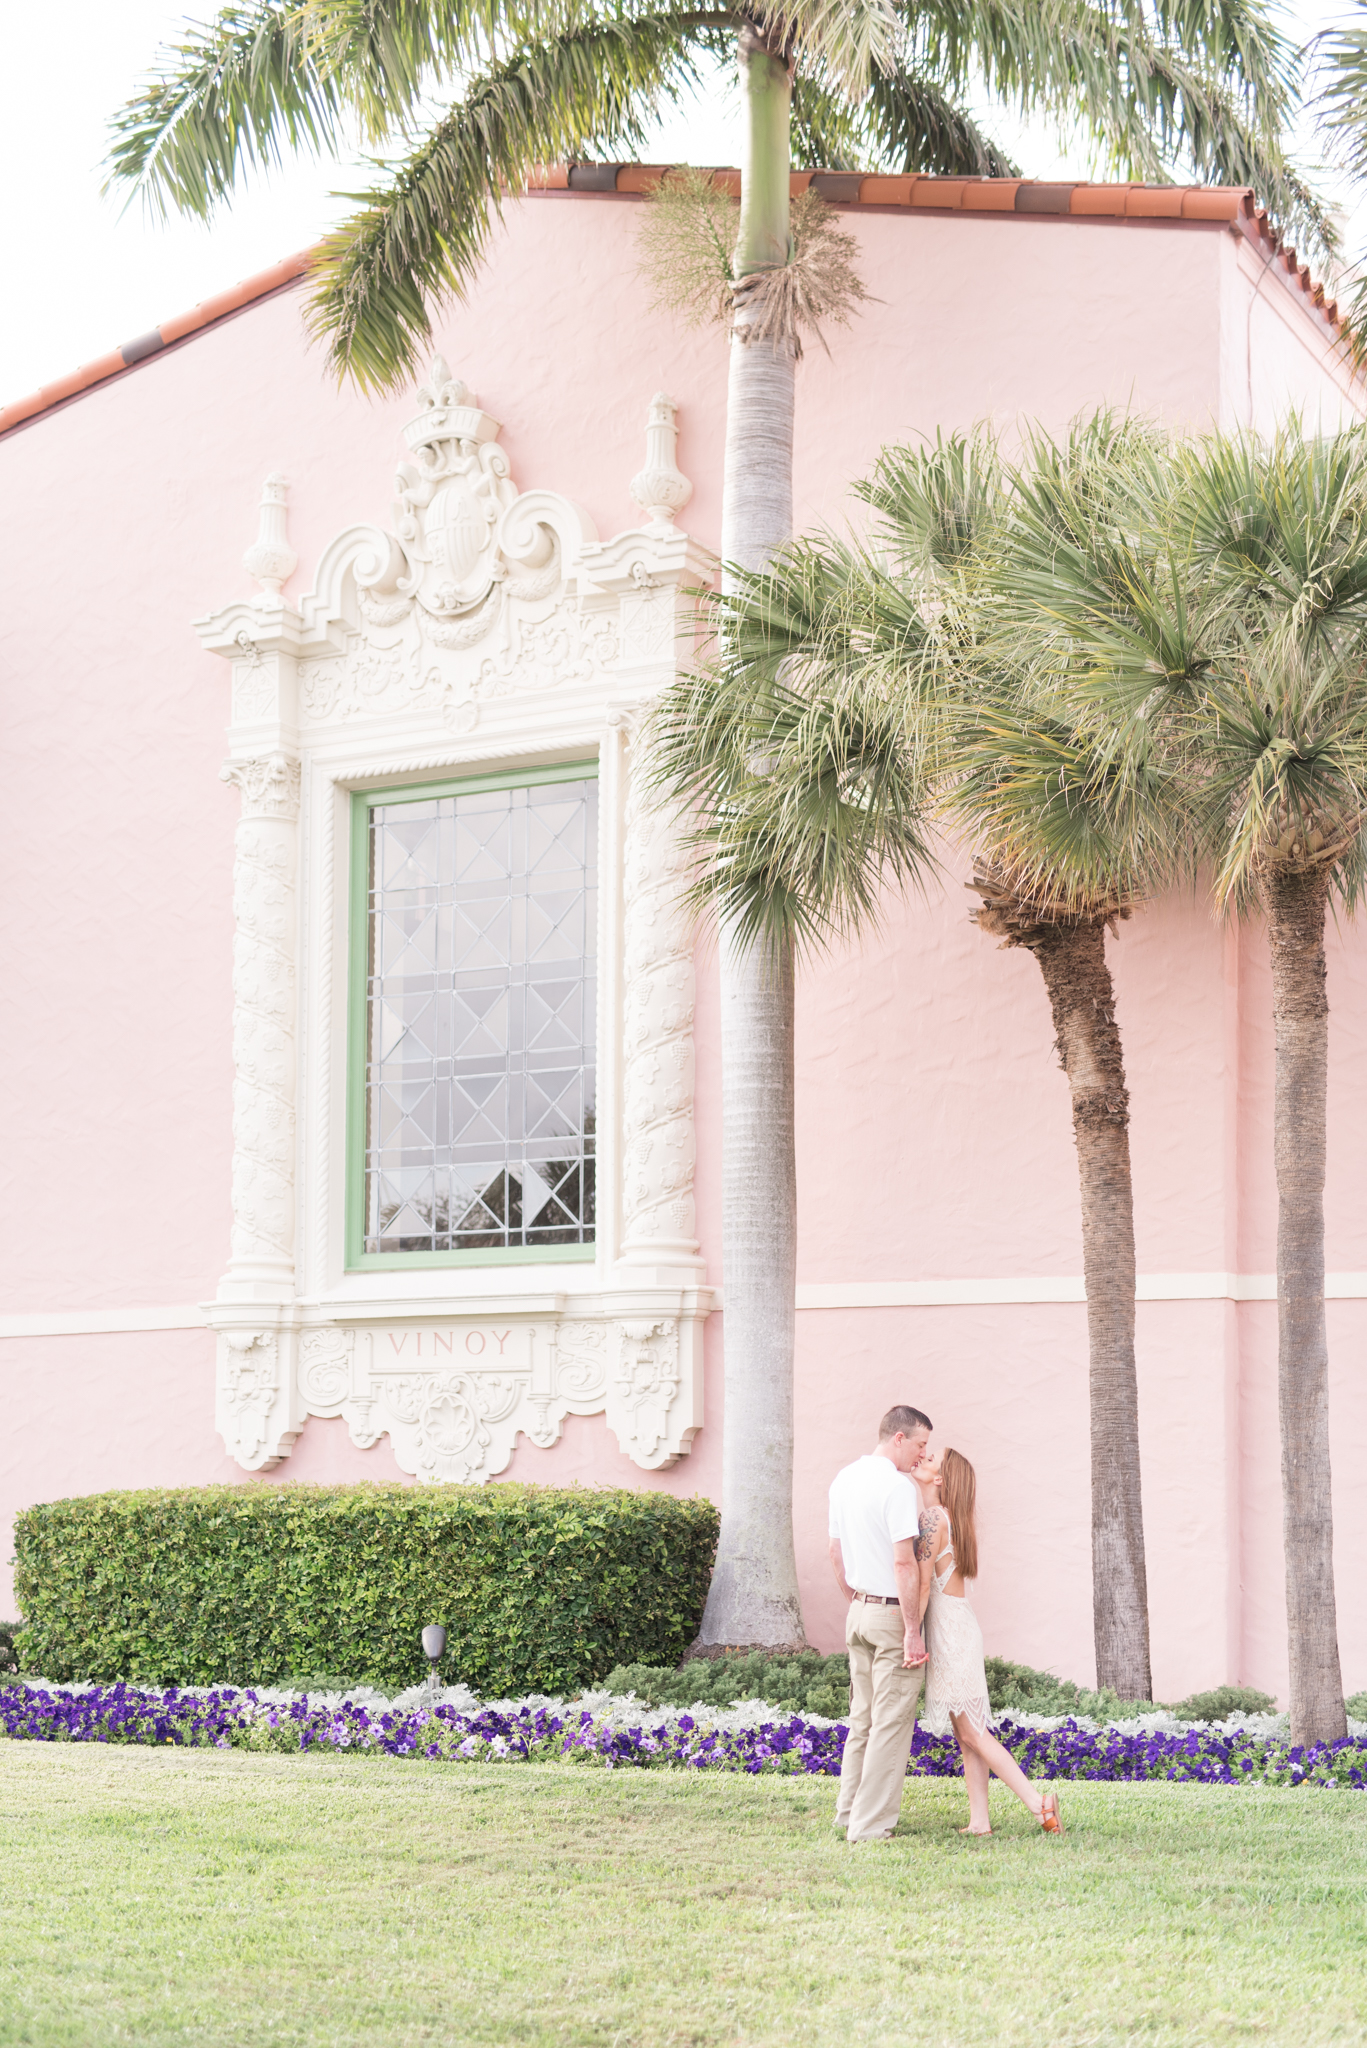 Engaged couple kiss in front of The Vinoy Renaissance hotel.